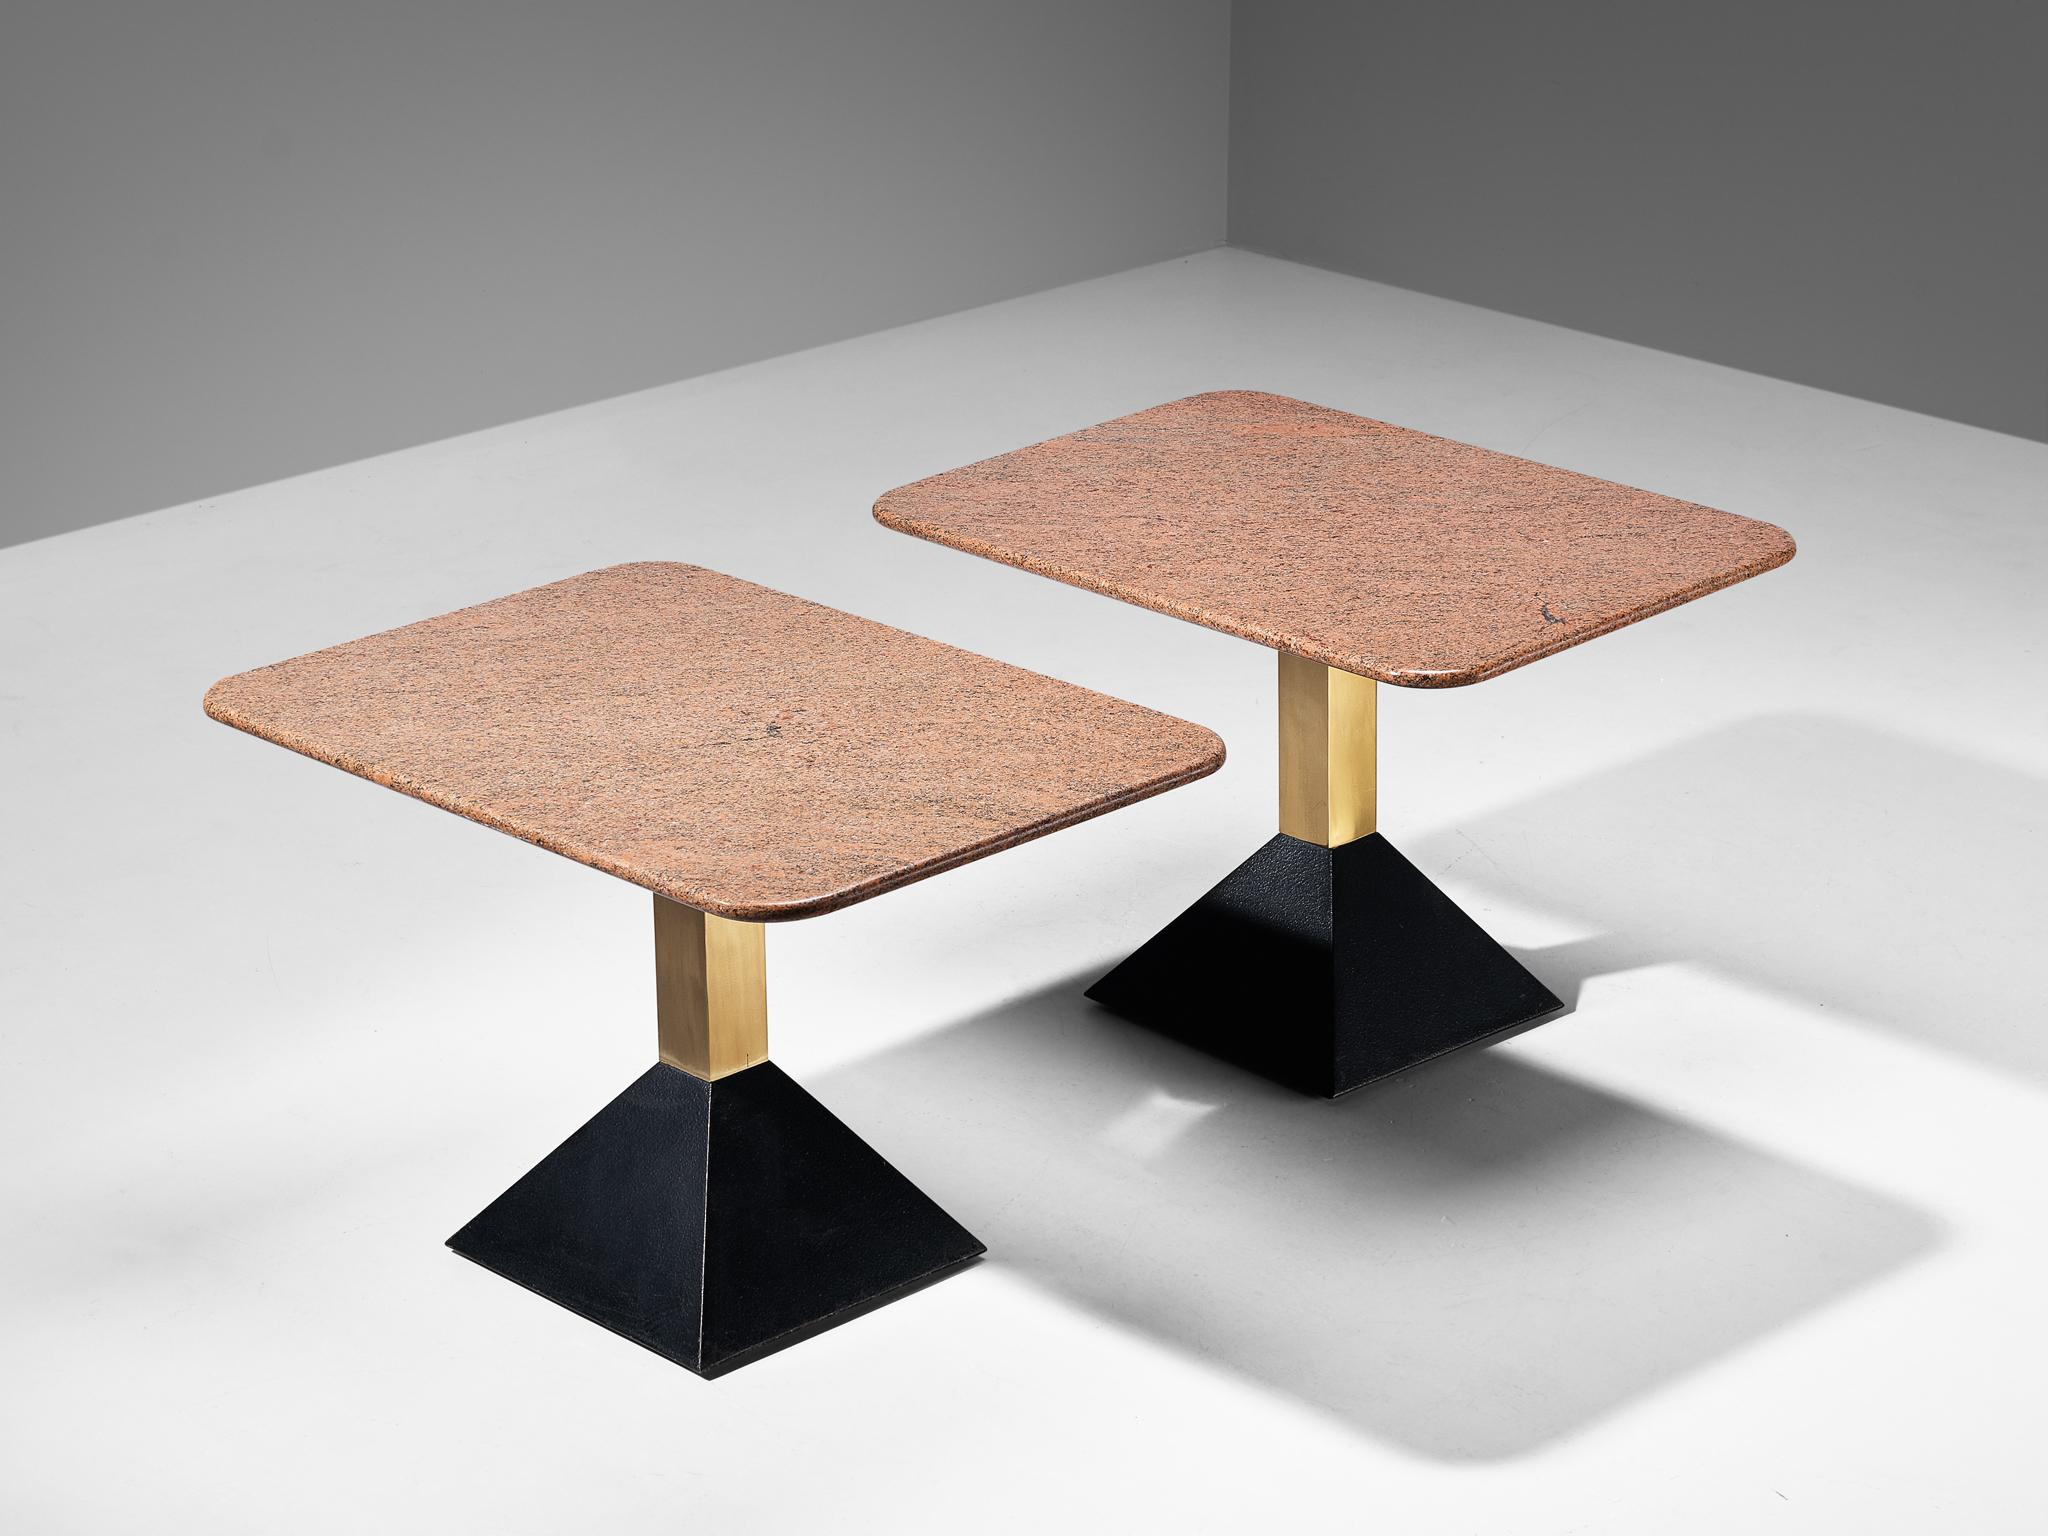 Coffee tables, granite, metal, brass, Italy, 1980s

These side tables feature a grey tabletop in rectangular format. The granite shows a vivid surface. A brass pedestal ends in a black trapezoid base in black metal. The interplay between various